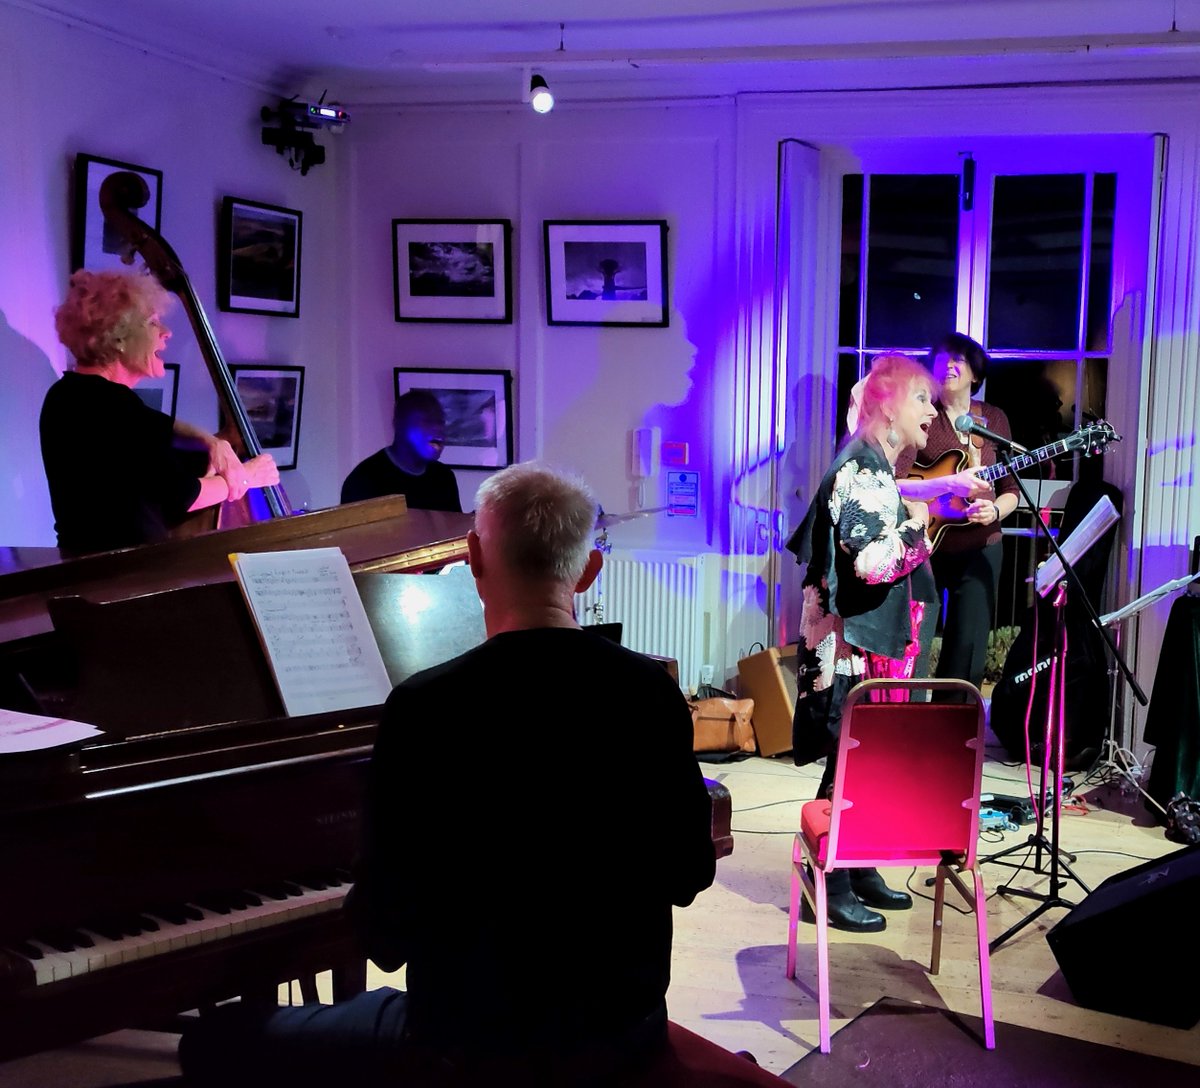 Throwback to the last jazz concert by Carol Grimes & Friends! Our #JazzInTheHouse season starts next week, and we have a stellar line-up, including the talented #CarolGrimes. First up is the Kate Williams Quartet Thurs 2 May @ 8 pm. Full line-up & tickets: bit.ly/JITH-2024